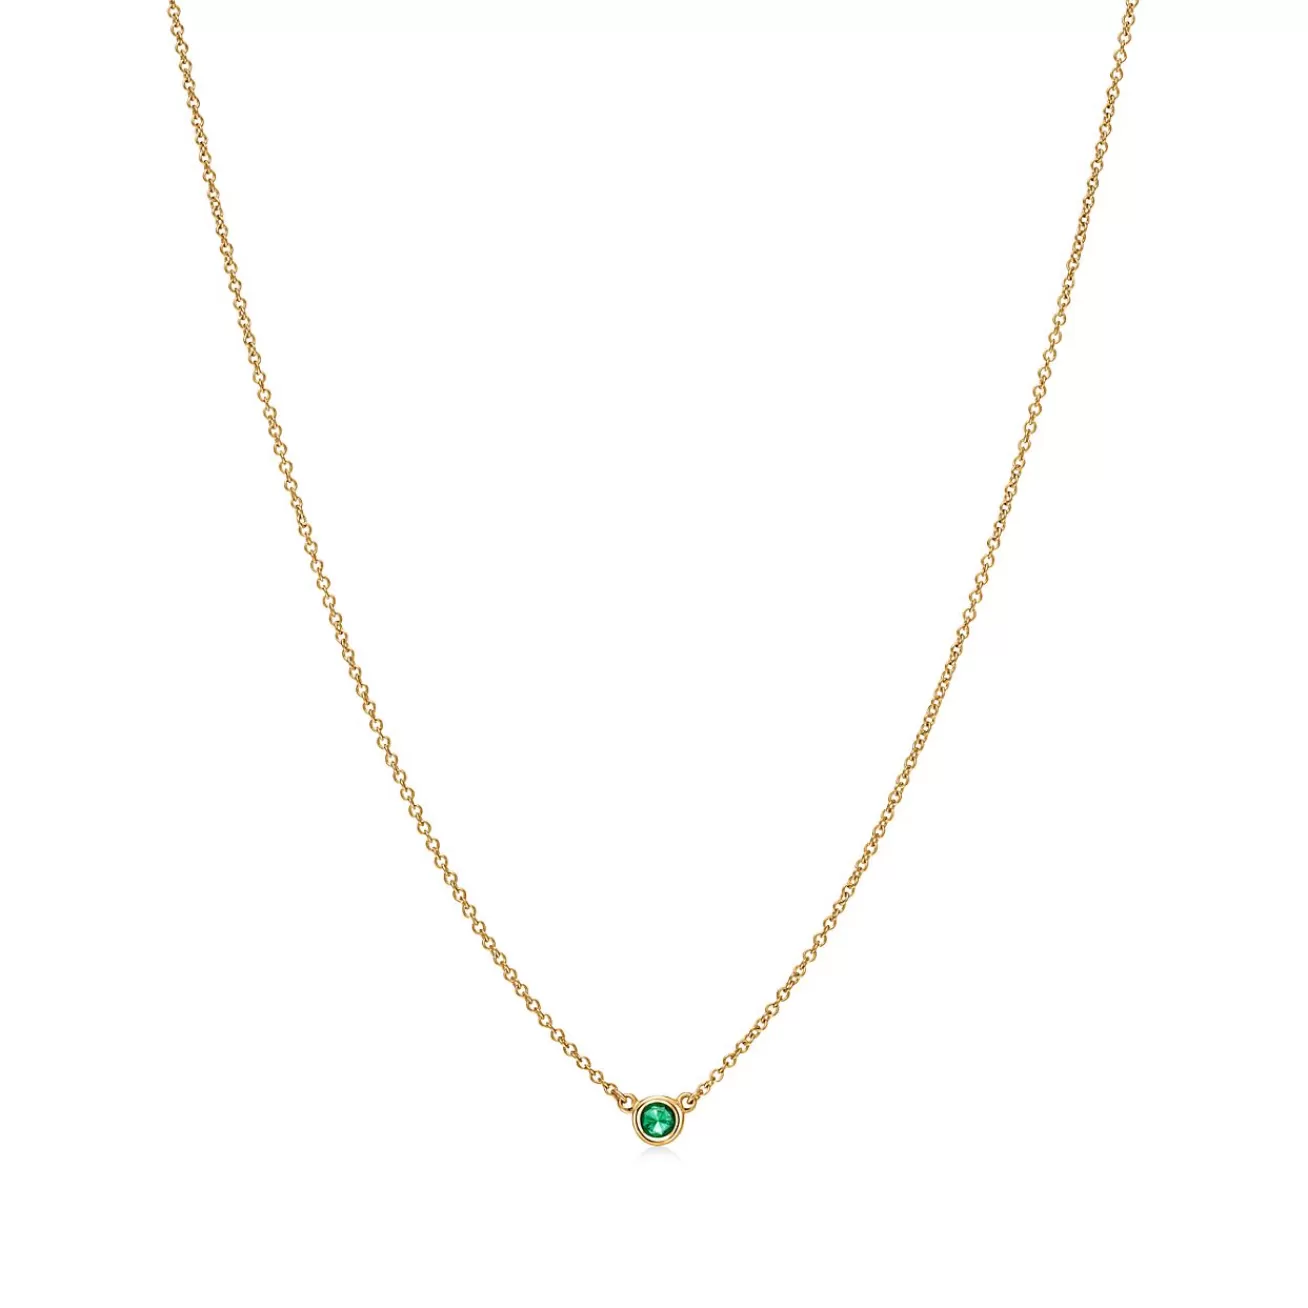 Tiffany & Co. Elsa Peretti® Color by the Yard Pendant in Yellow Gold with an Emerald | ^ Necklaces & Pendants | Dainty Jewelry